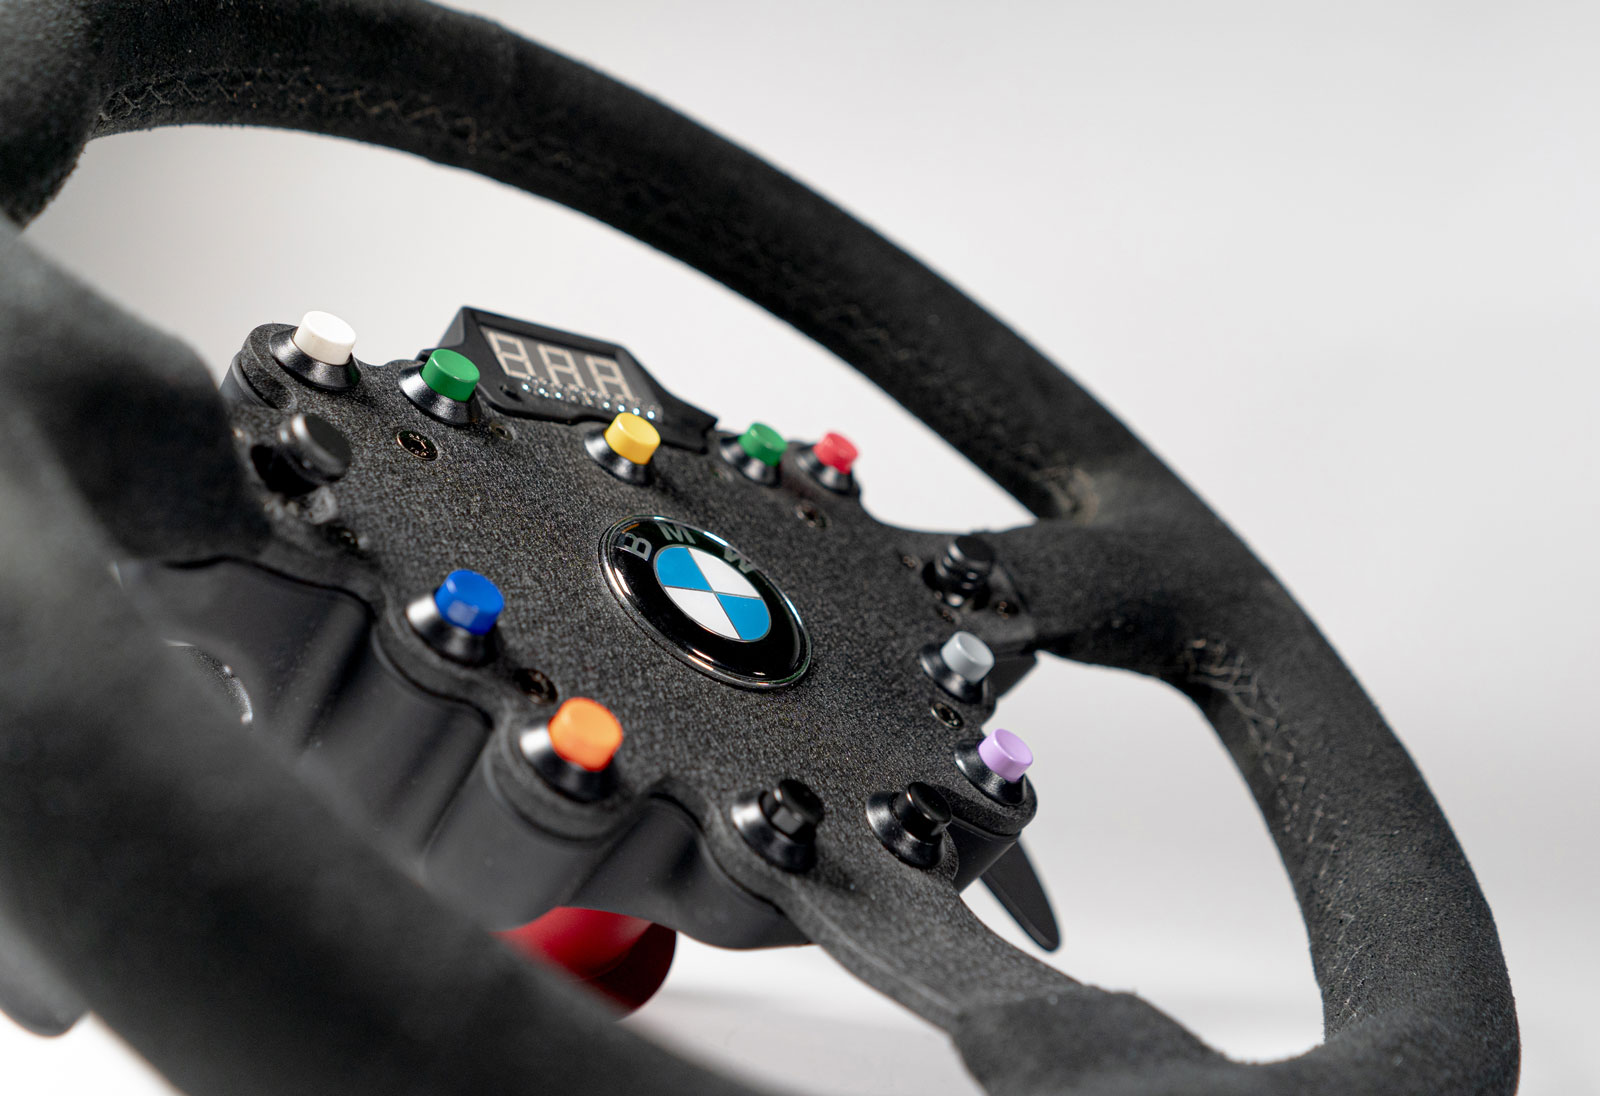 Fanatec ClubSport Steering Wheel BMW GT2 振動モーター内蔵 PC、PS 